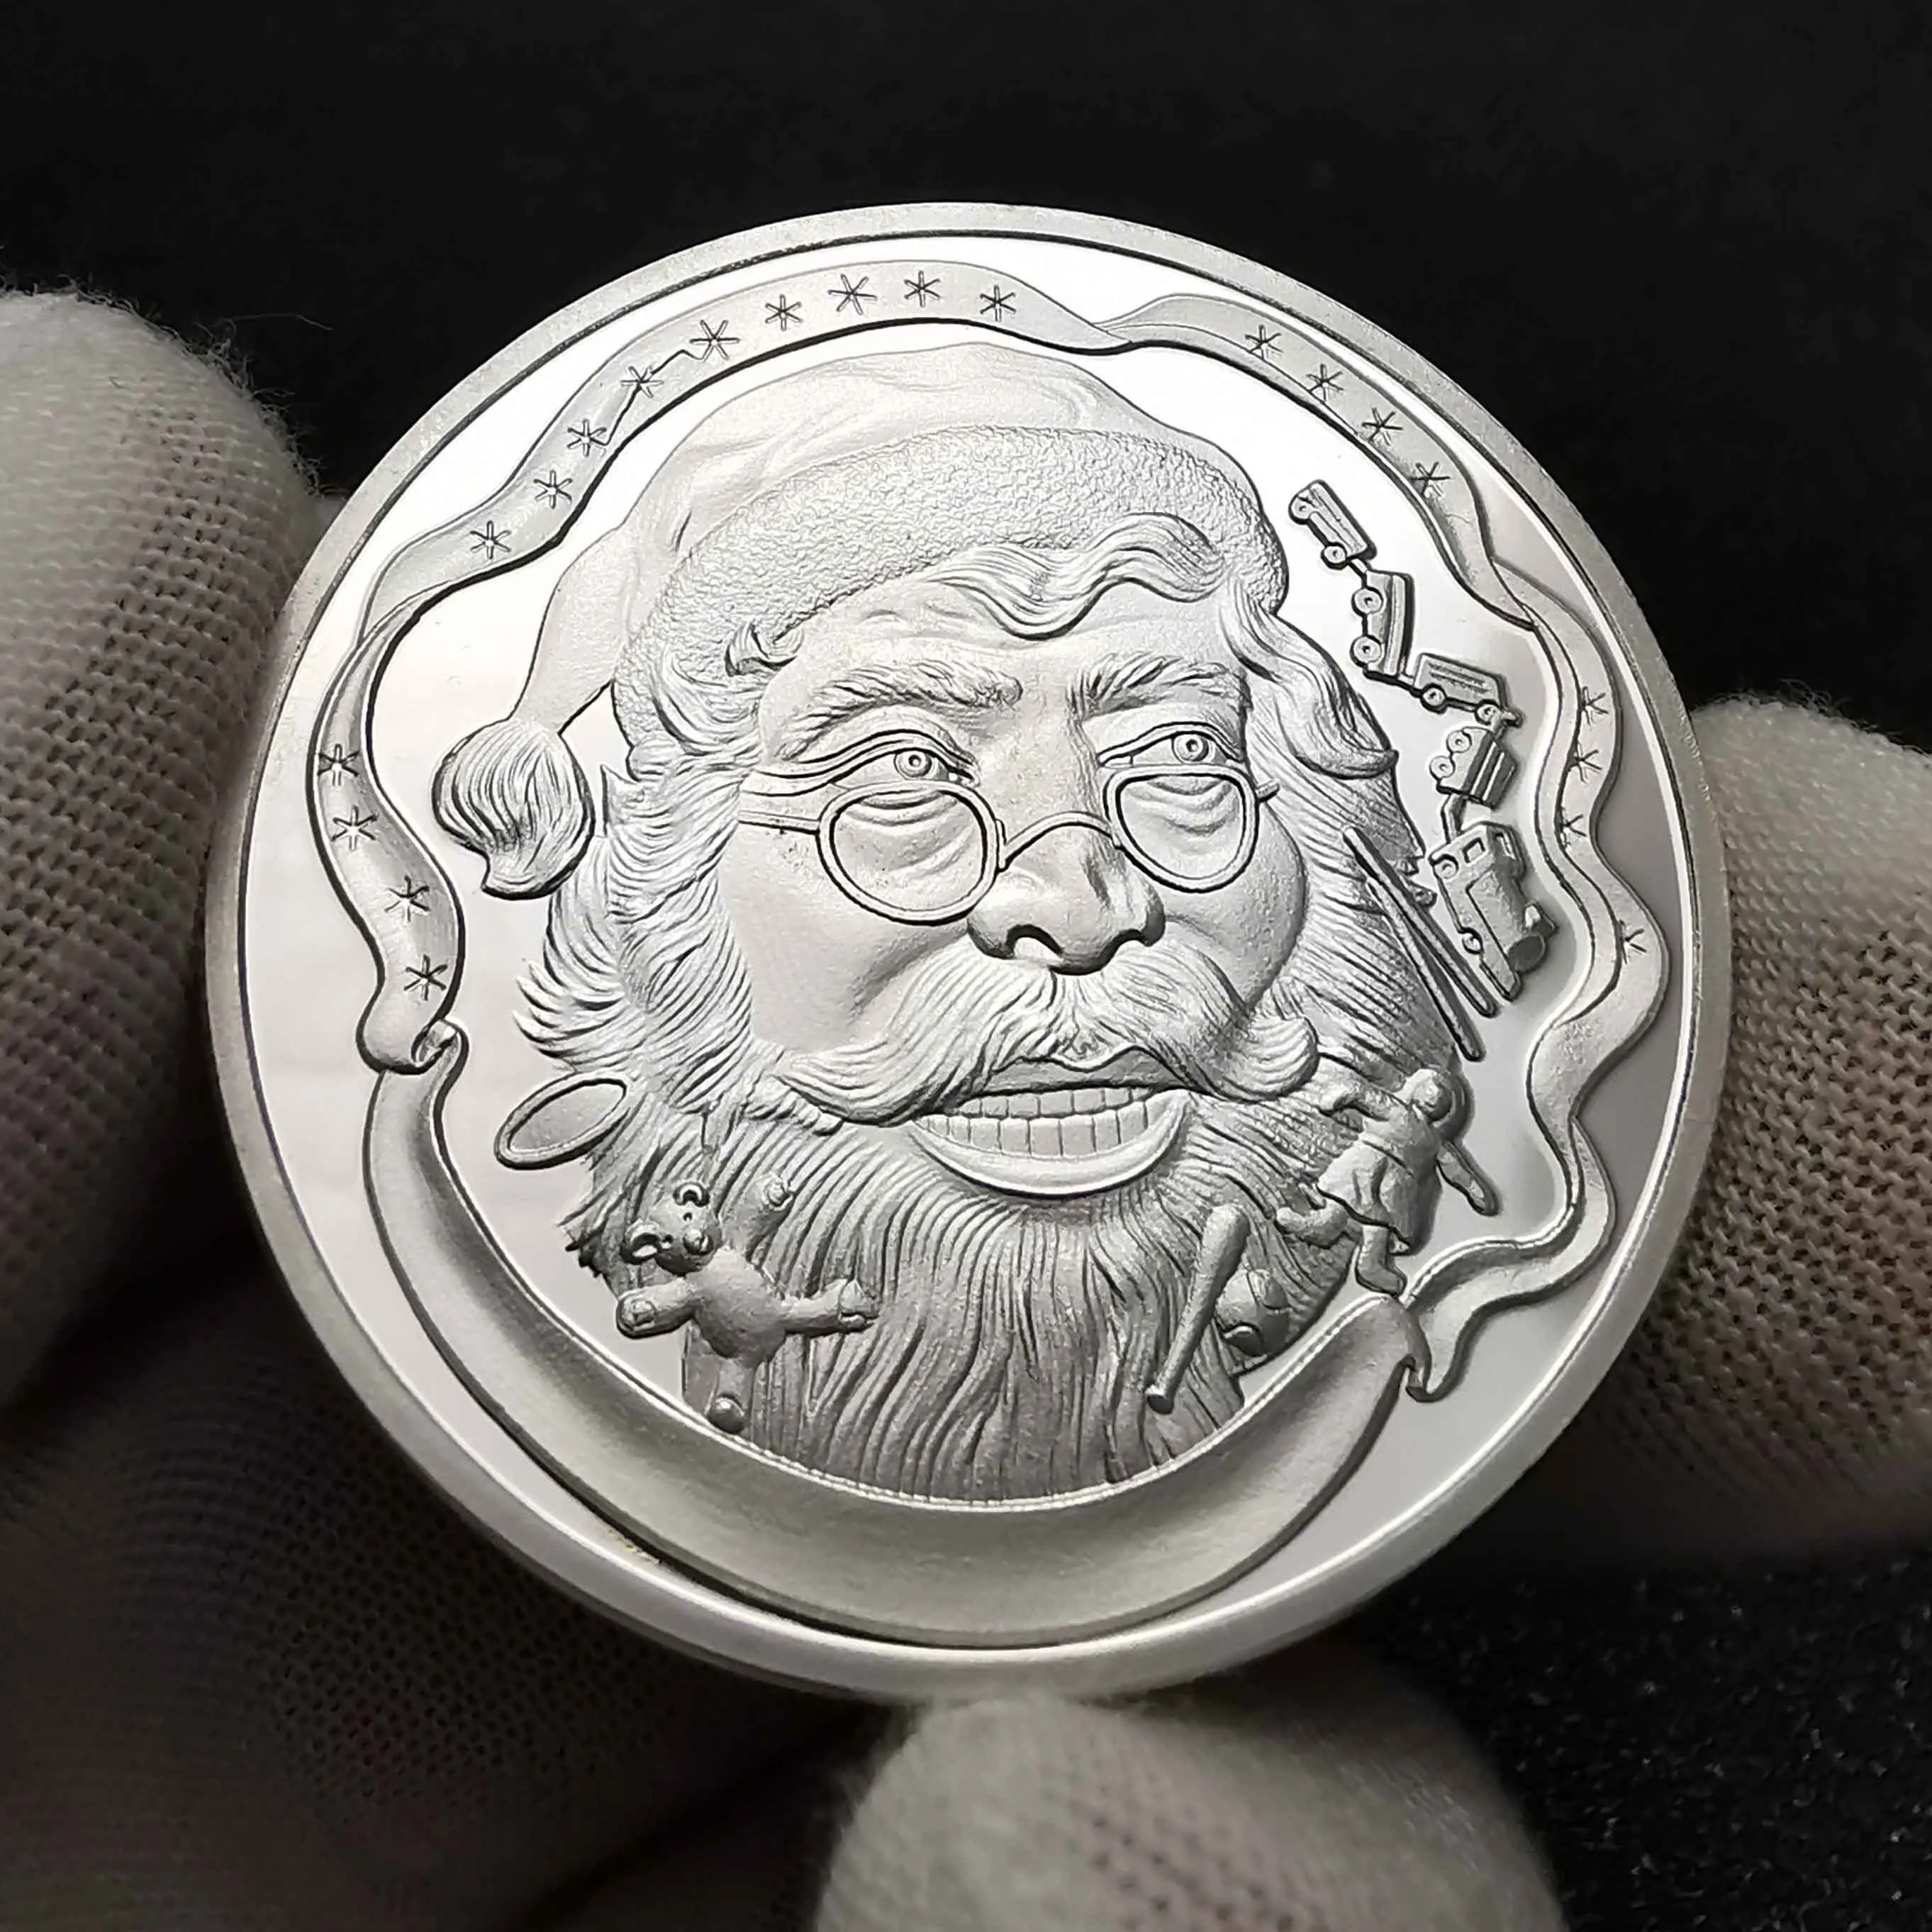 Details about   Coin Commemorative Merry Christmas Challenge Plated Santa Coins Holiday Gifts 